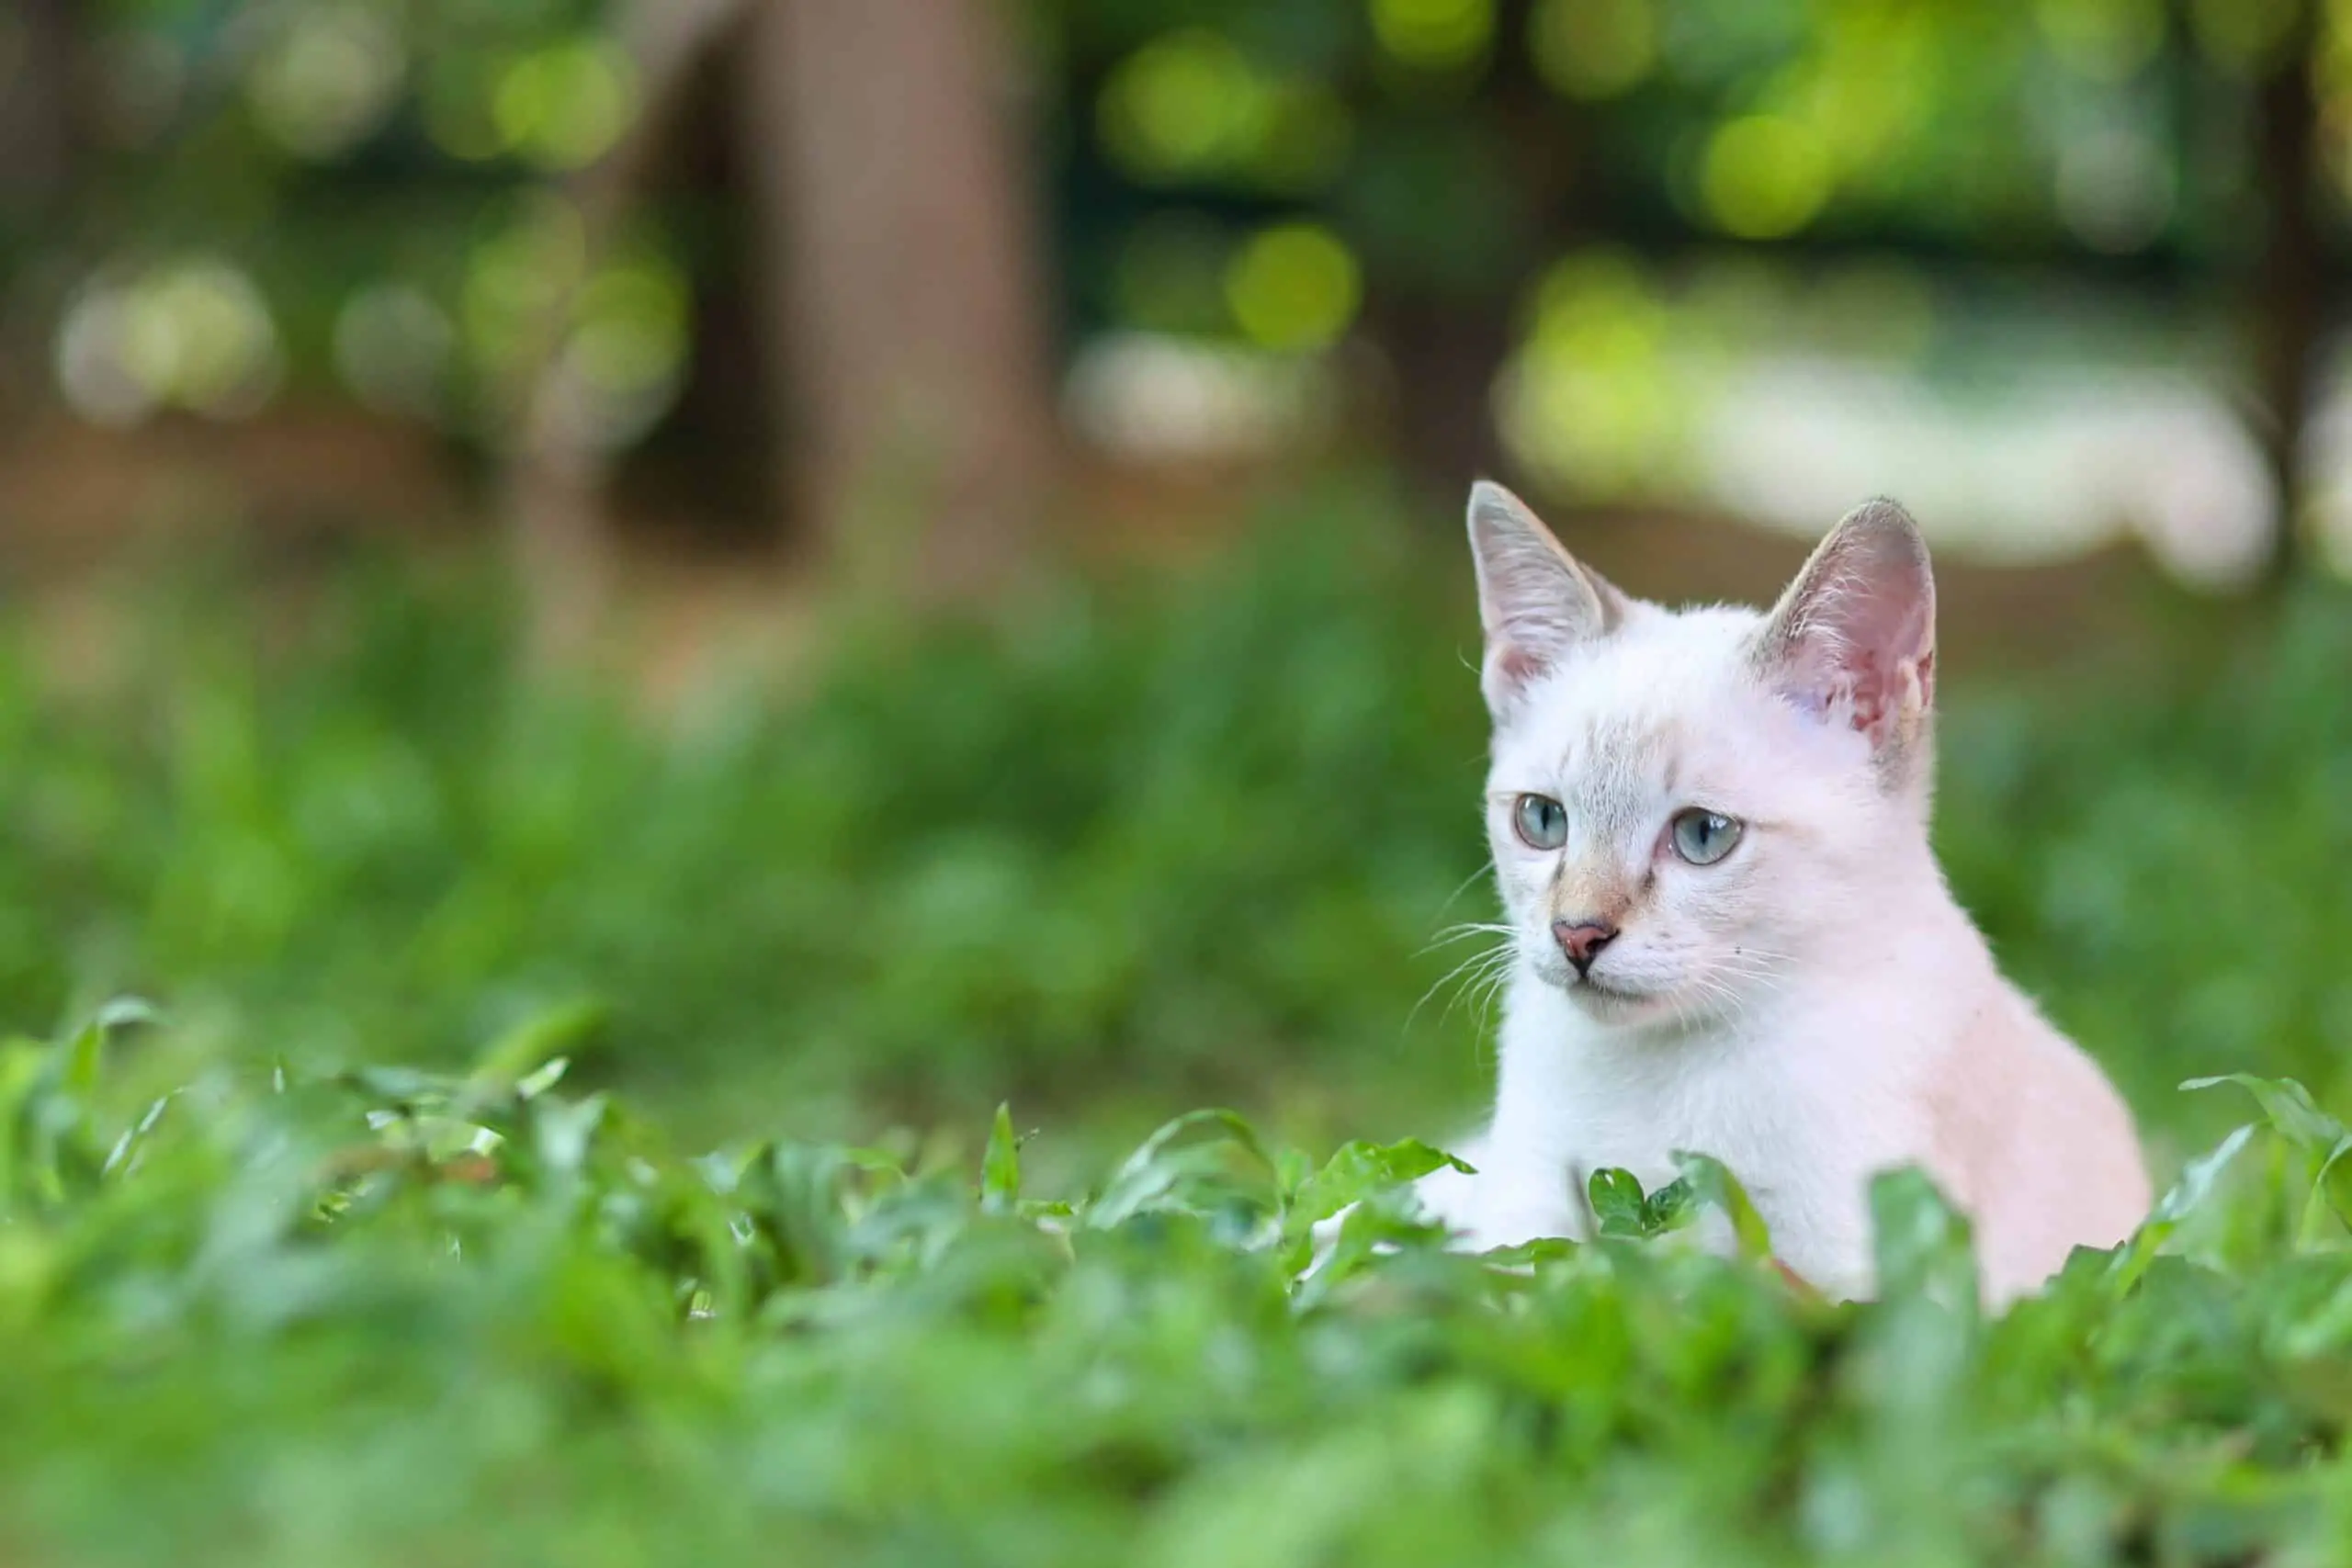 Look after your cat by using a pet-friendly weed killer